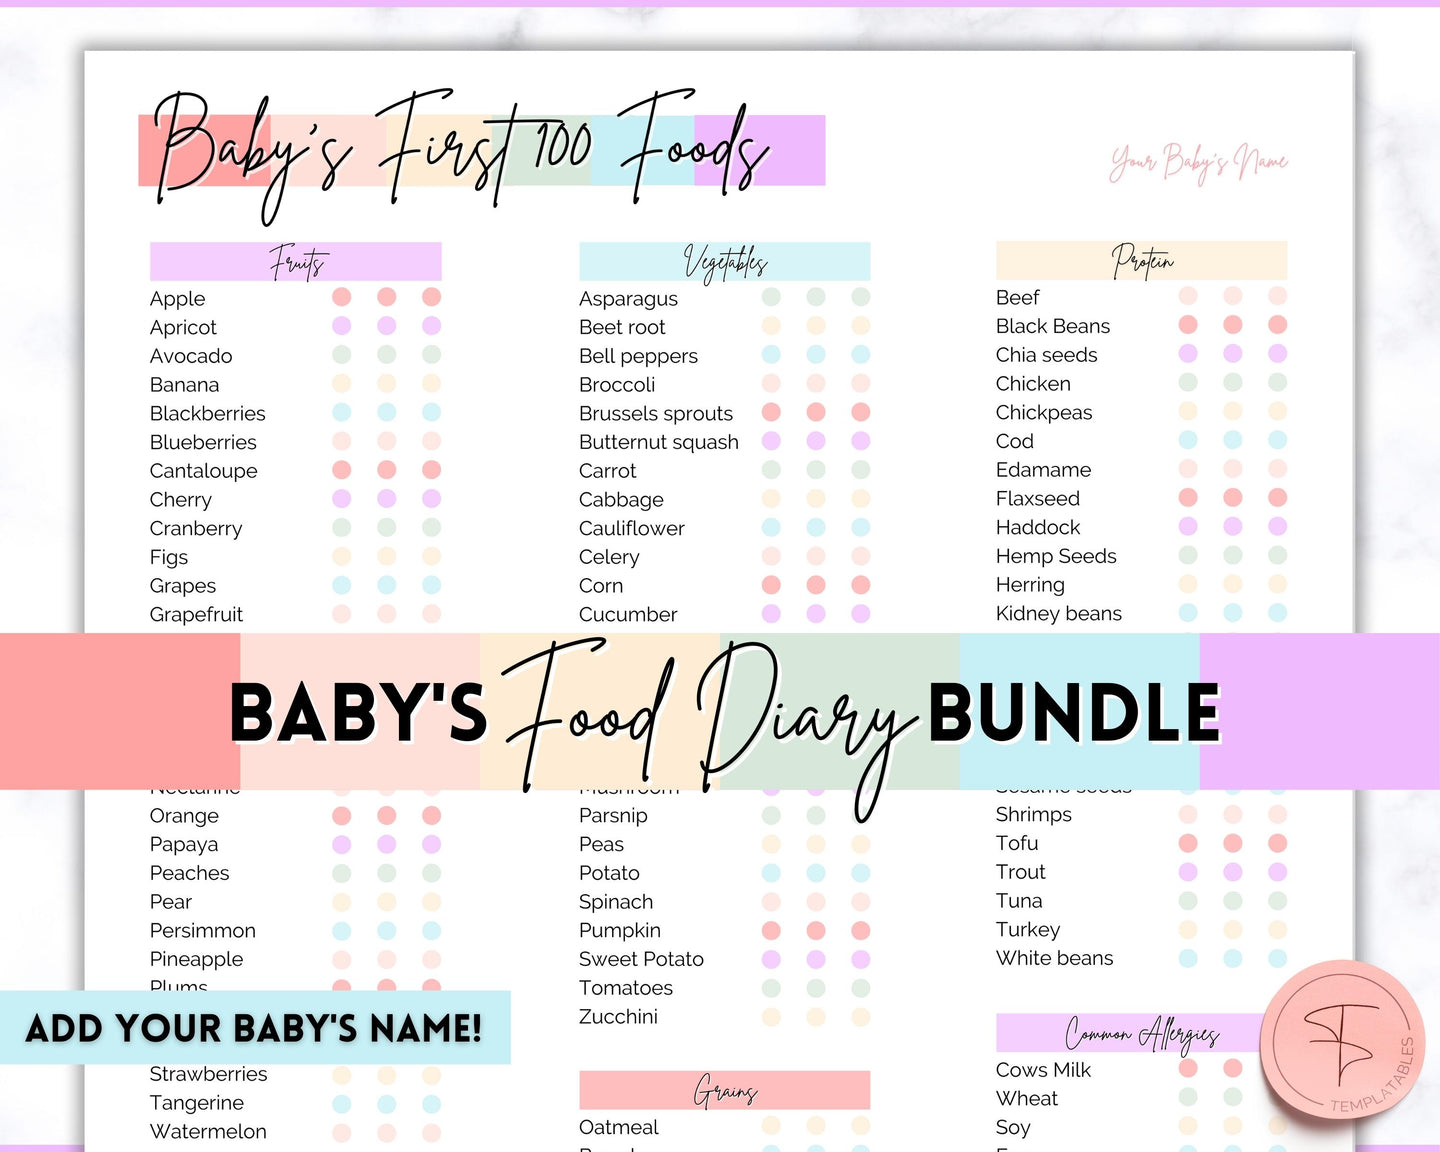 Rainbow Baby Food Tracker Printable BUNDLE | Baby’s First Foods Meal Planner & Daily Food Diary, 100 Foods Before 1 | Colorful Rainbow